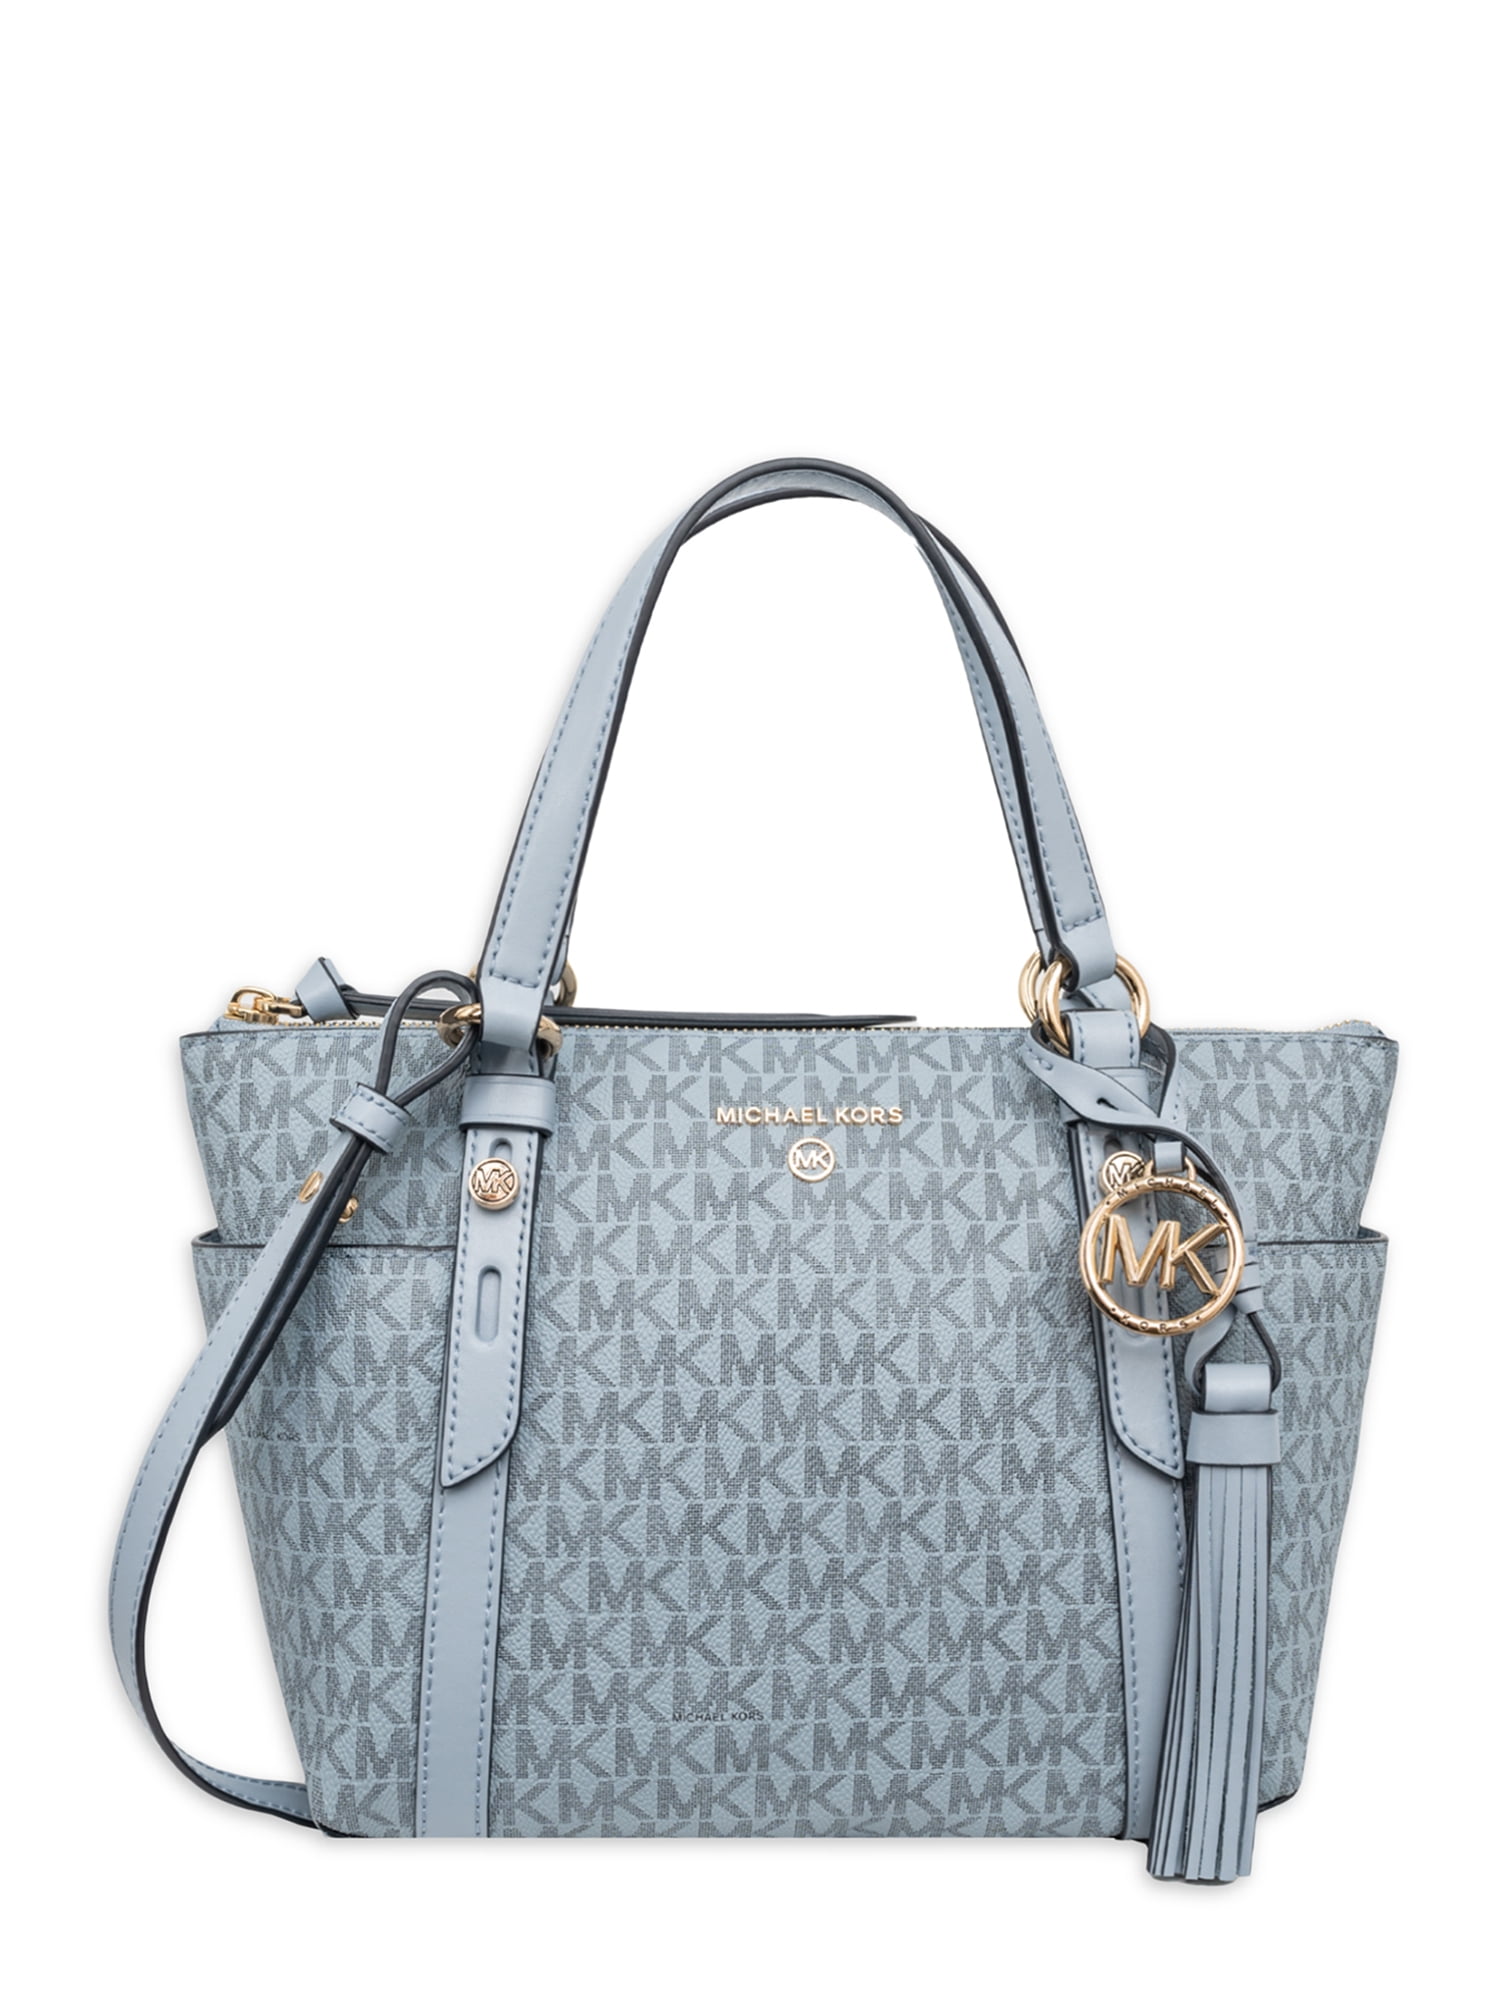 Michael Kors Sullivan Small Convertible Top Zip Tote Pale Blue One Size